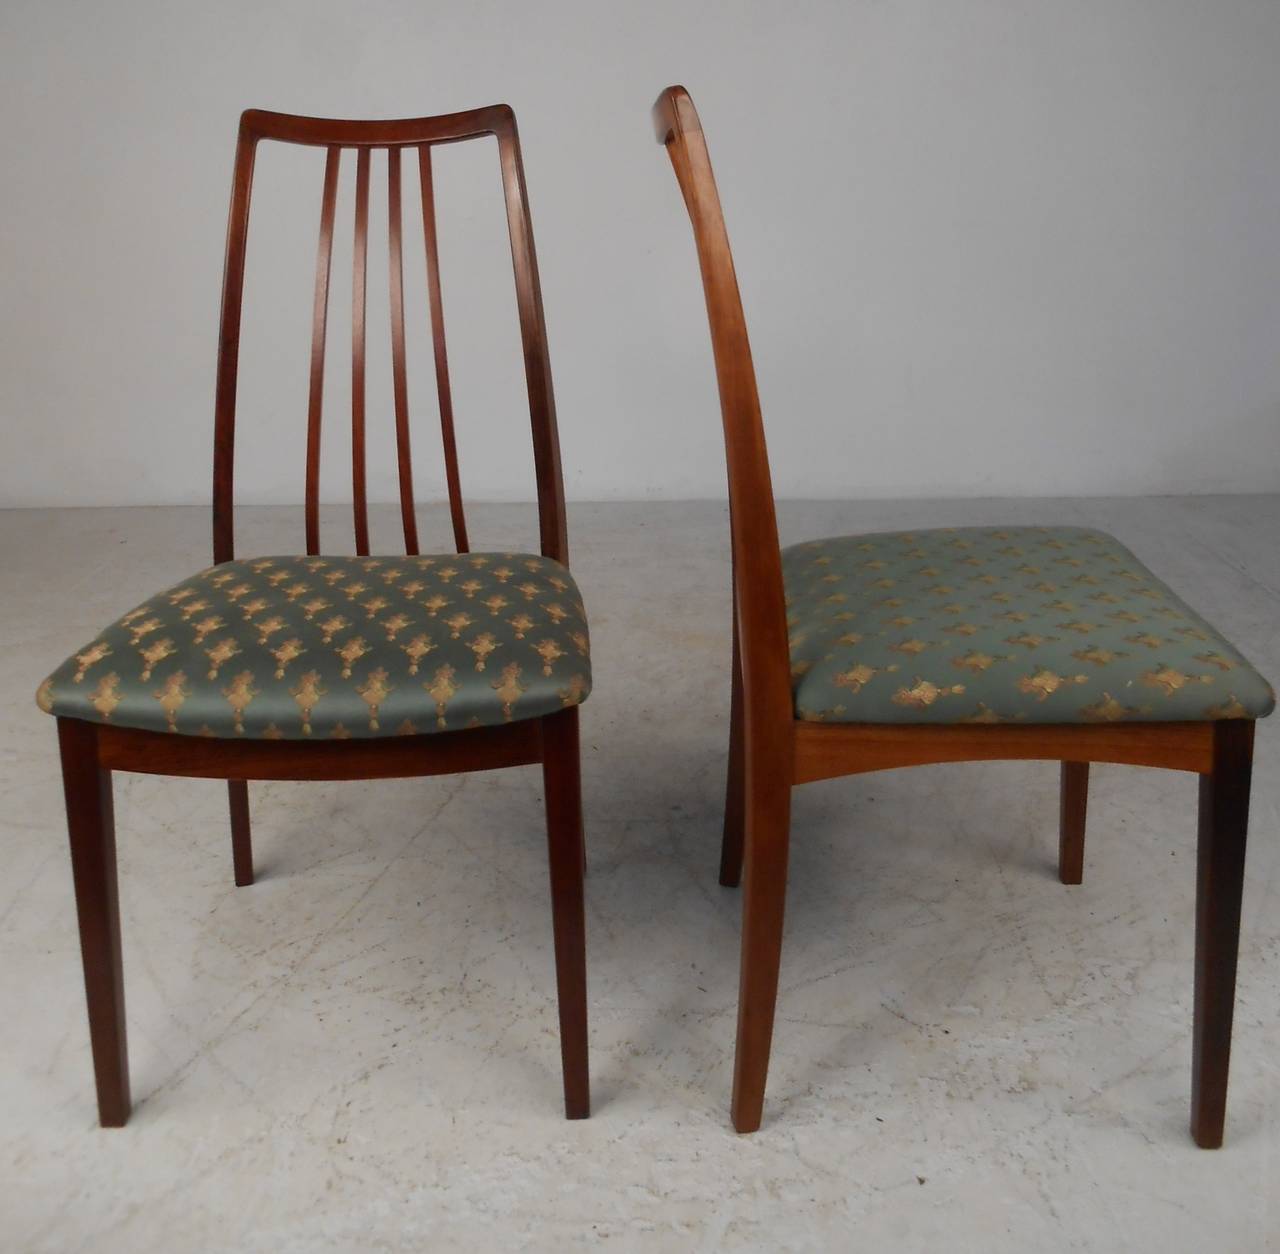 Omann Jun Rosewood Dining Table and Chairs, c. 1959 For Sale 2